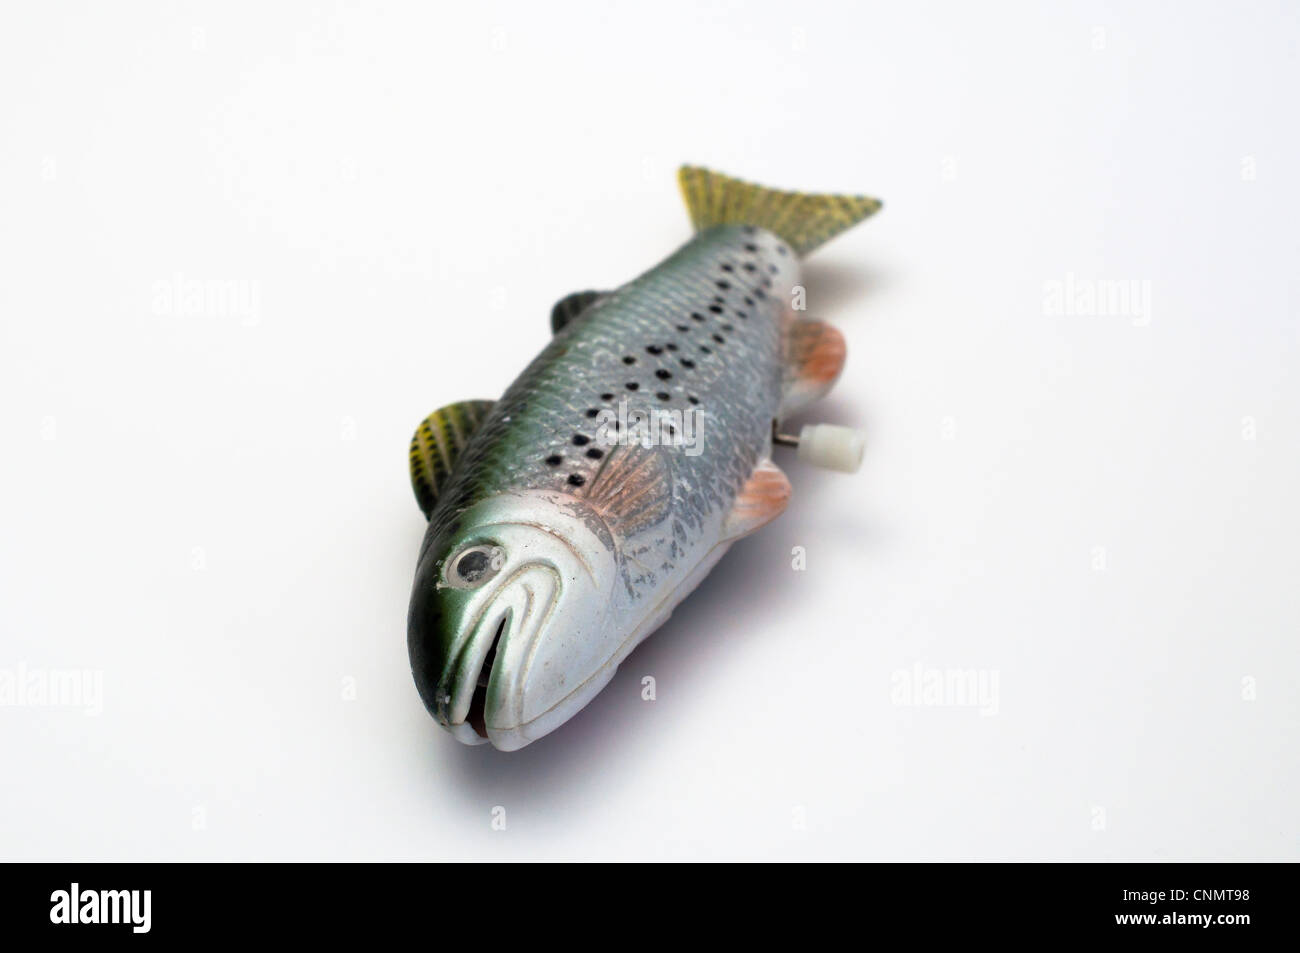 Fish out of water - a toy clockwork fish on a white background Stock Photo